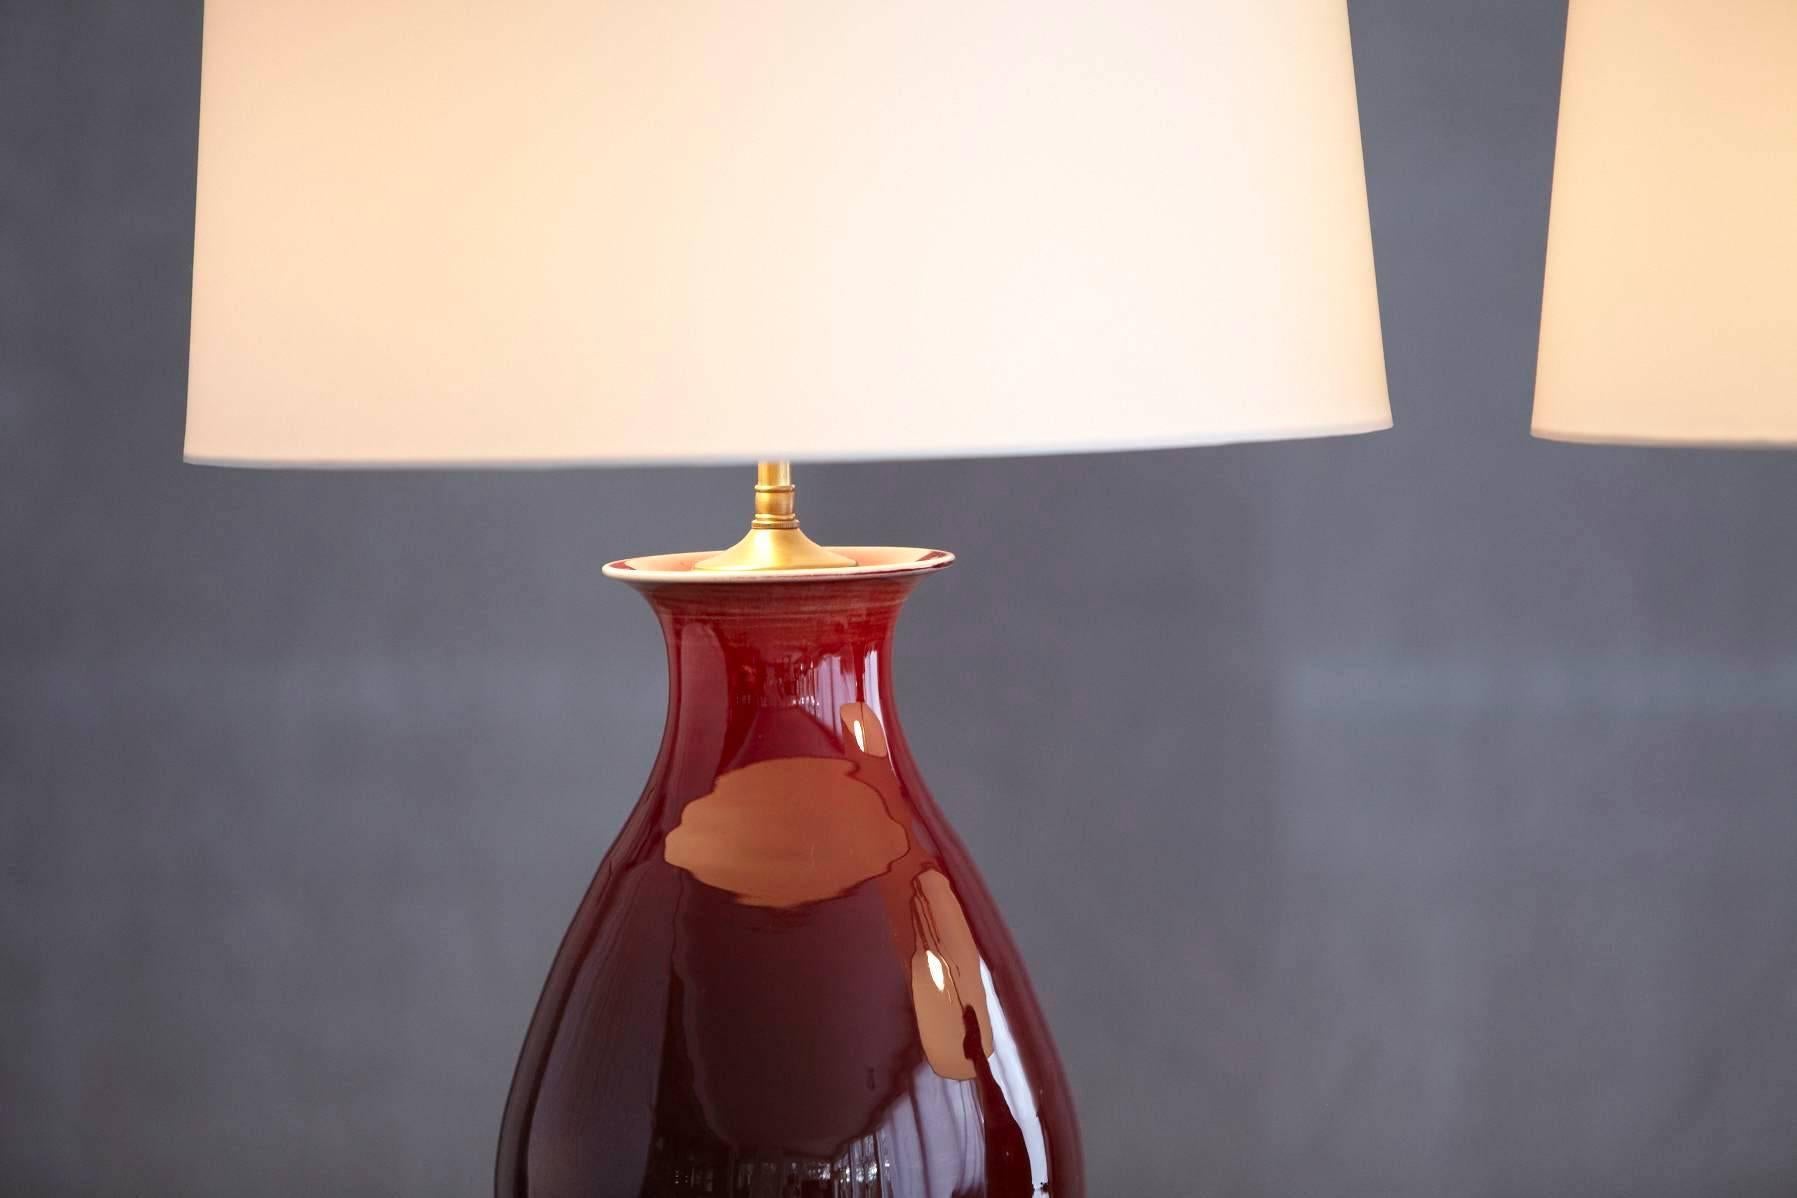 Pair of Deep Red Glazed Ceramic Lamps with New Ivory Shades, Height Adjustable 1